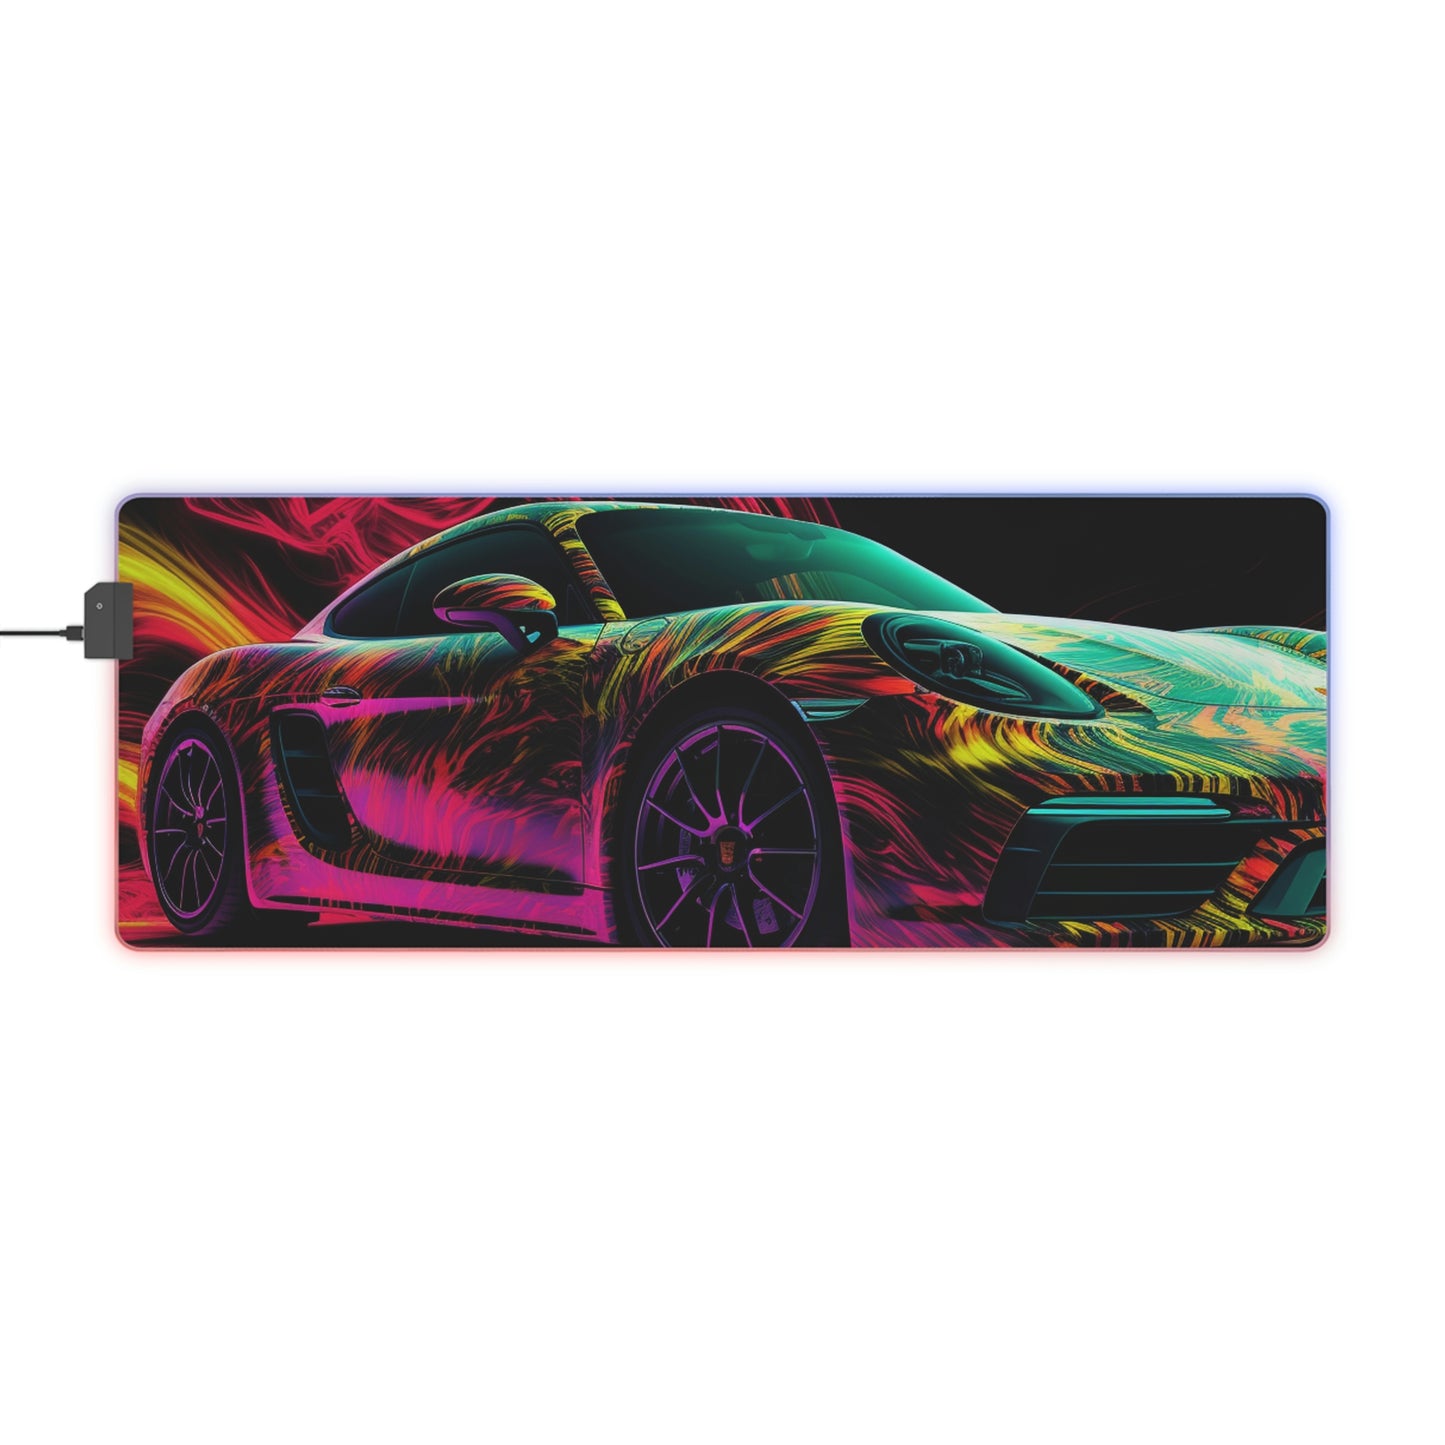 LED Gaming Mouse Pad Porsche Flair 1